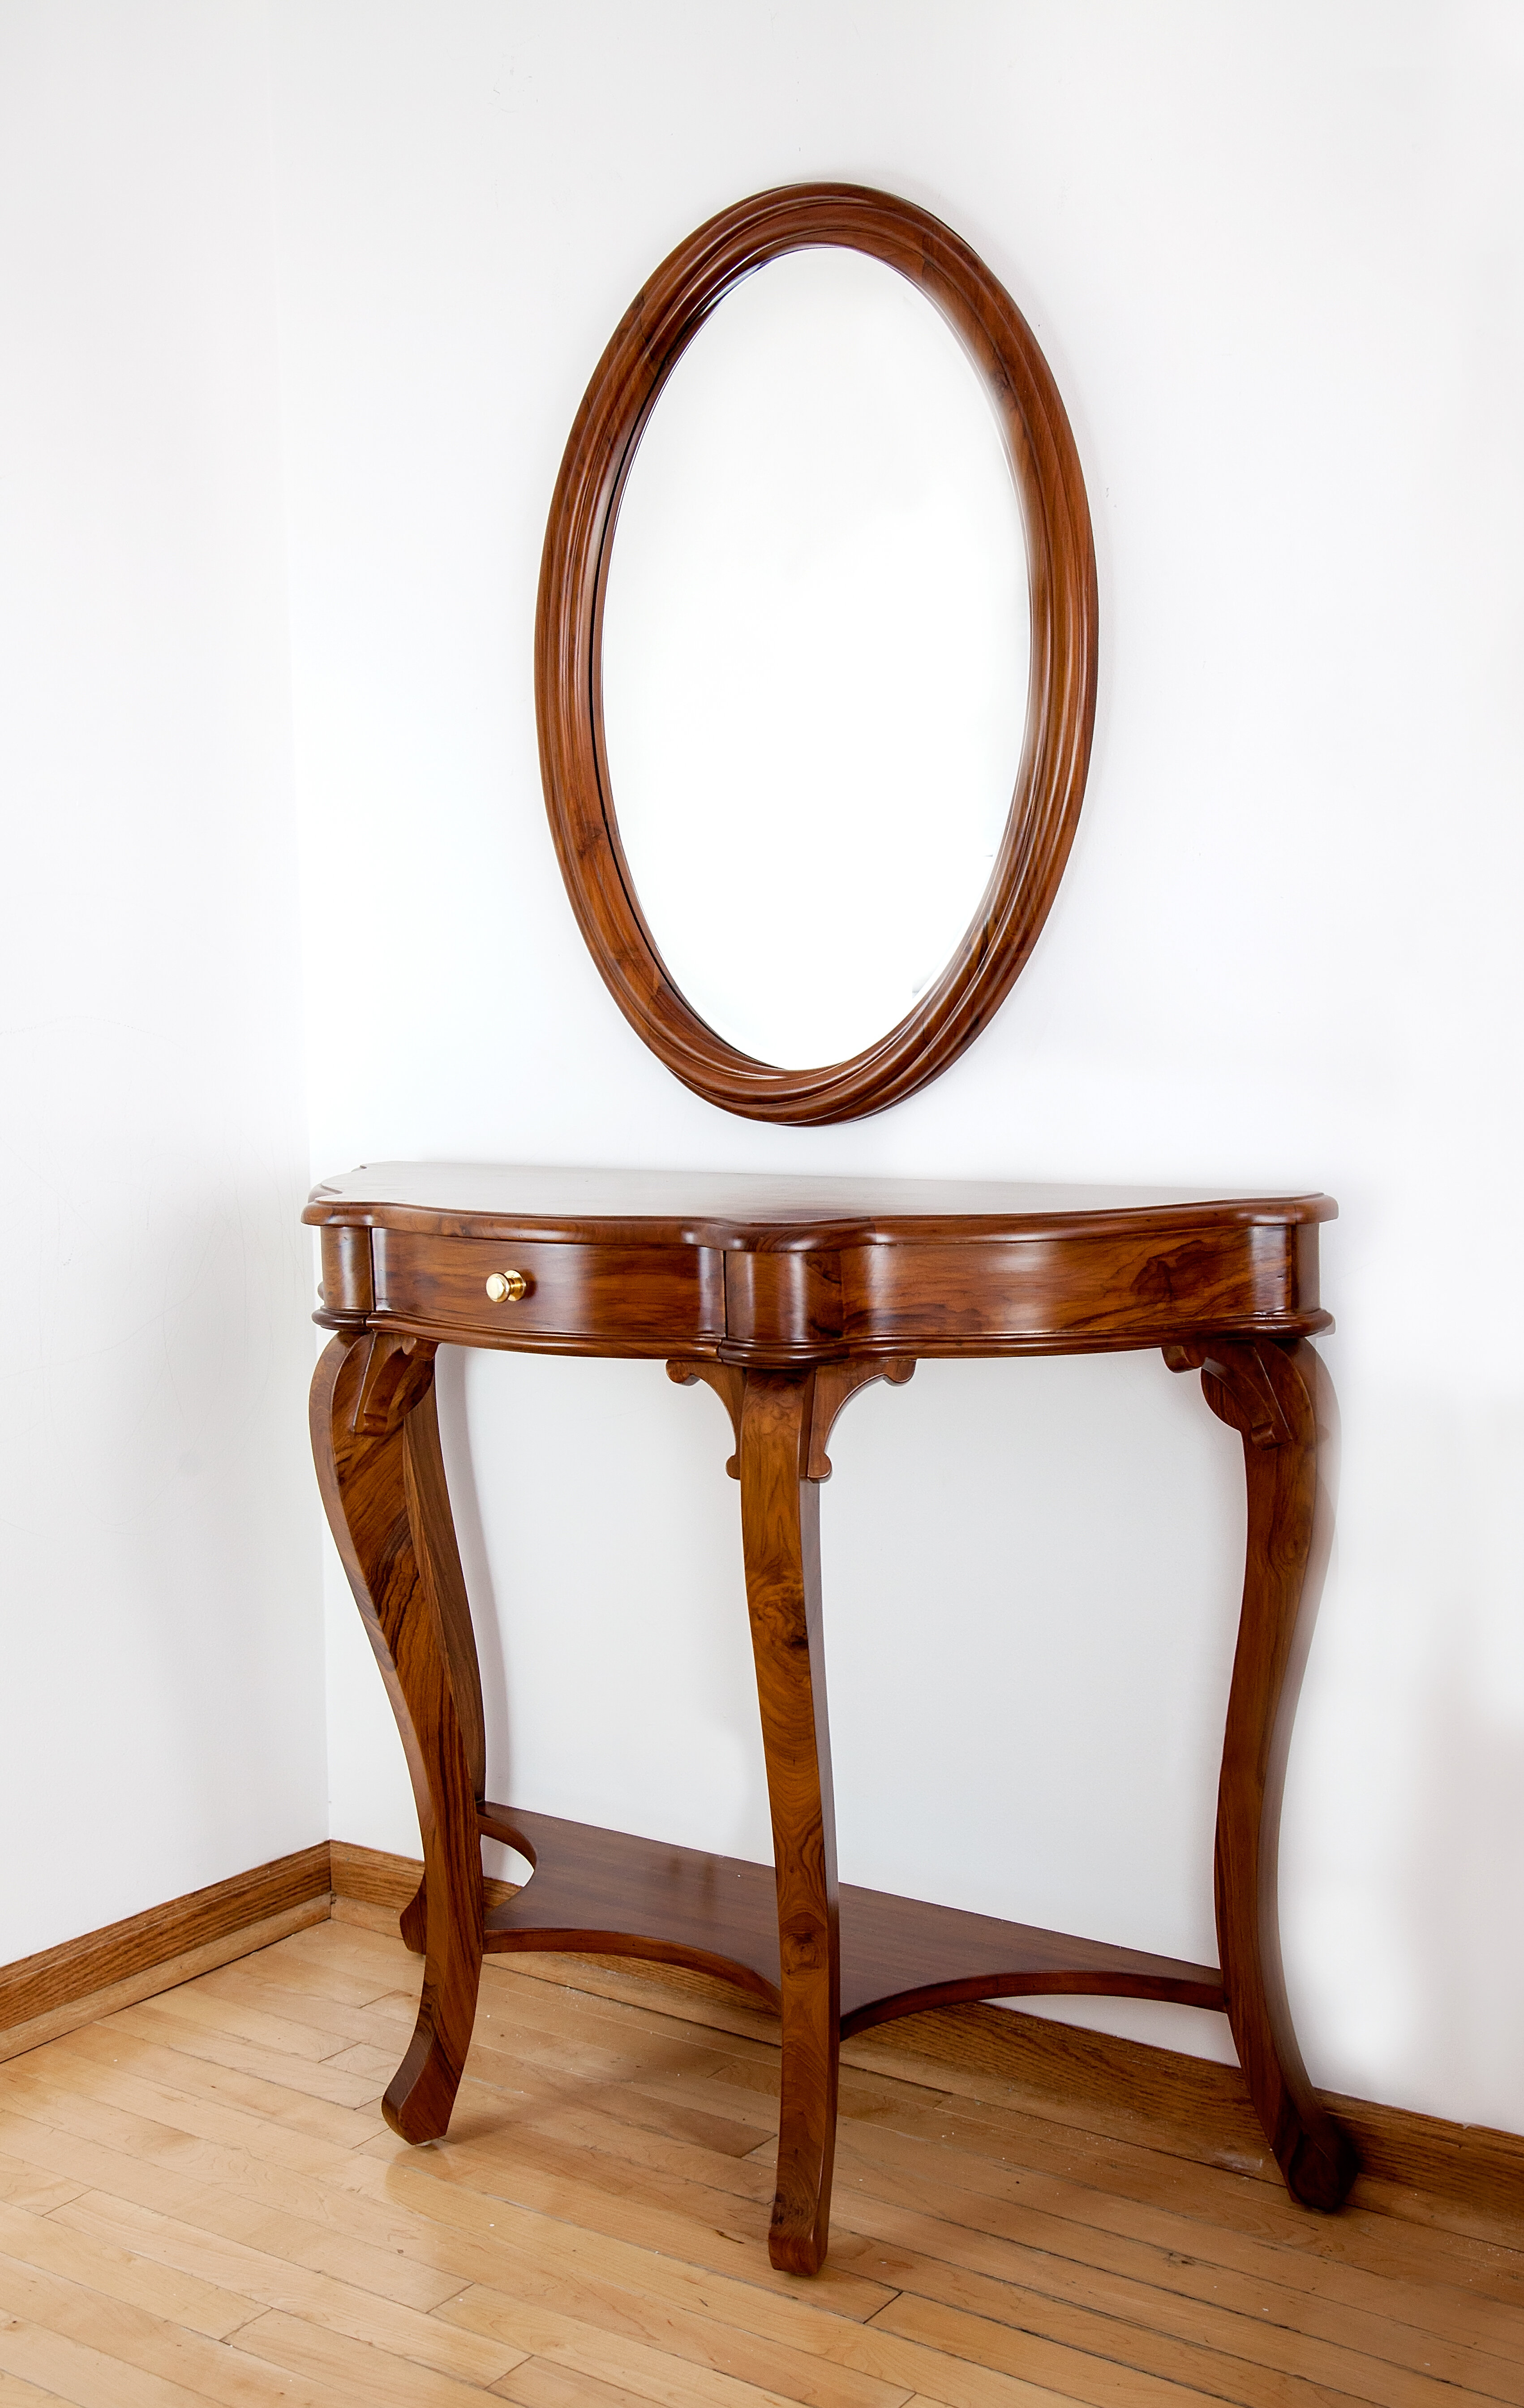 The Silver Teak 415 Solid Wood Console Table And Mirror Set Wayfair